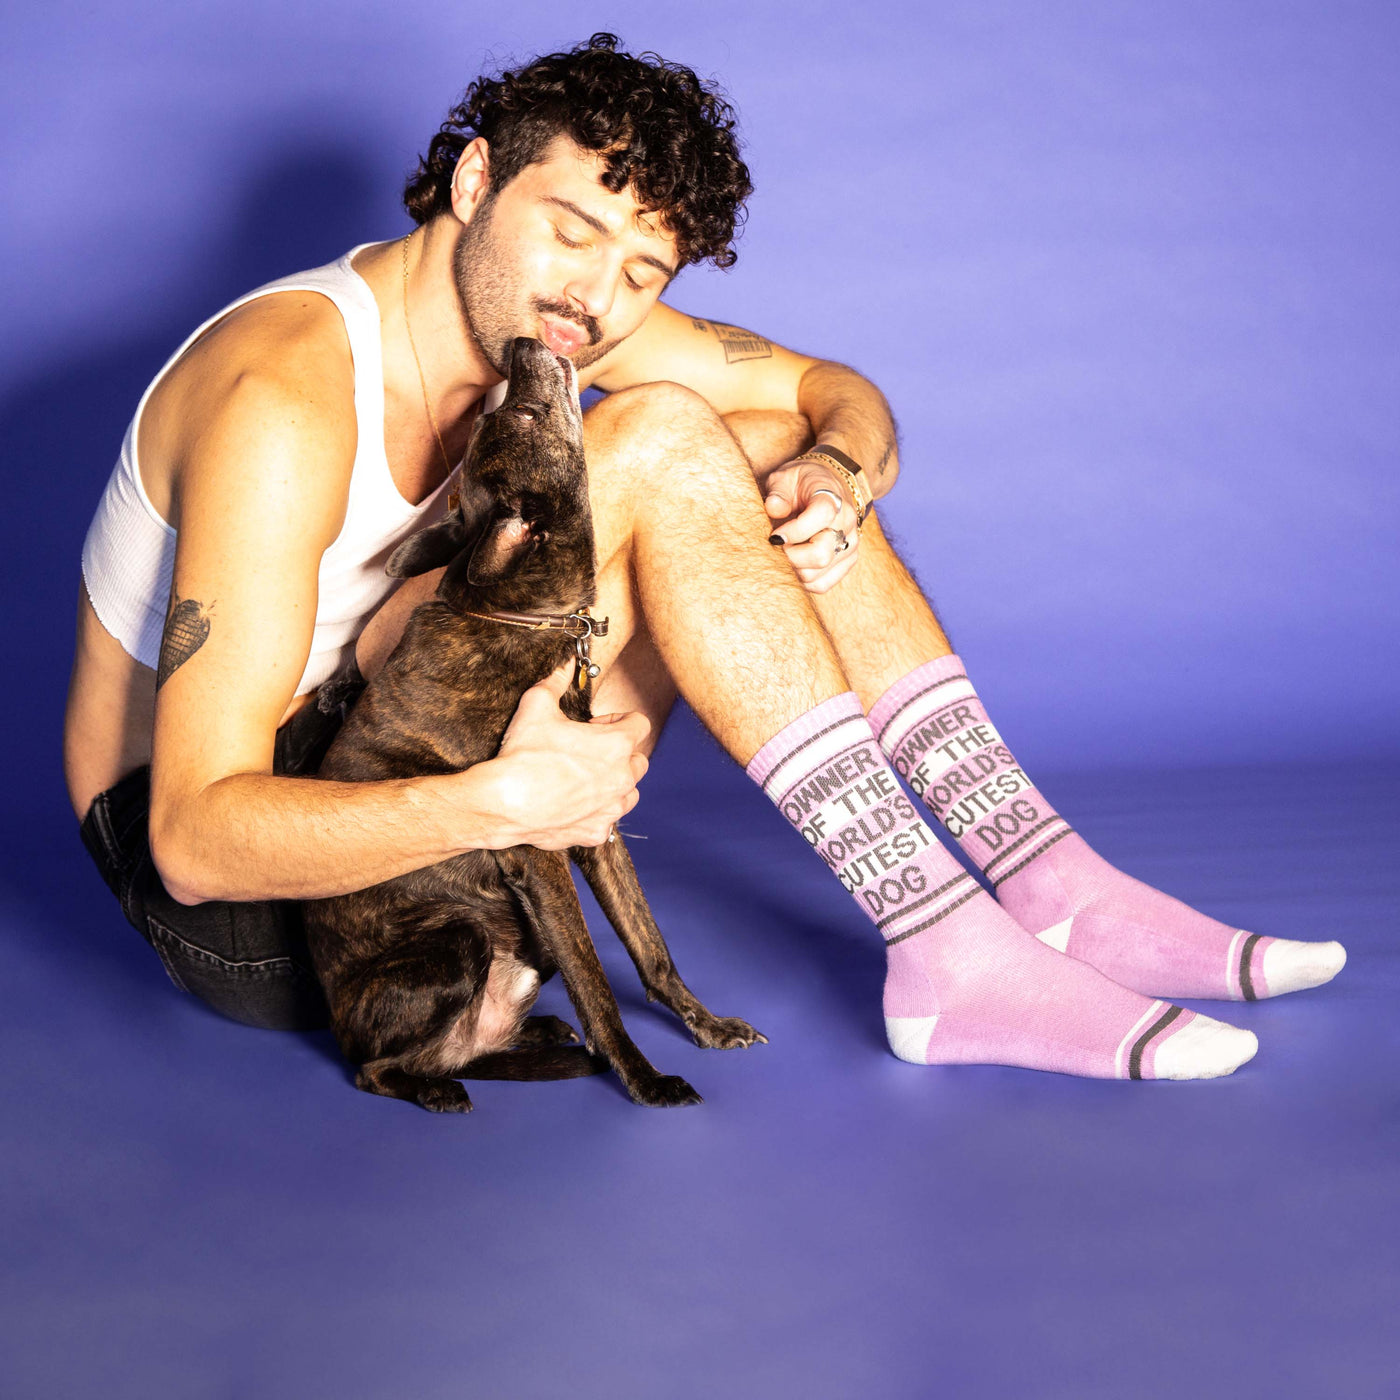 Owner of the World's Cutest Dog gym socks